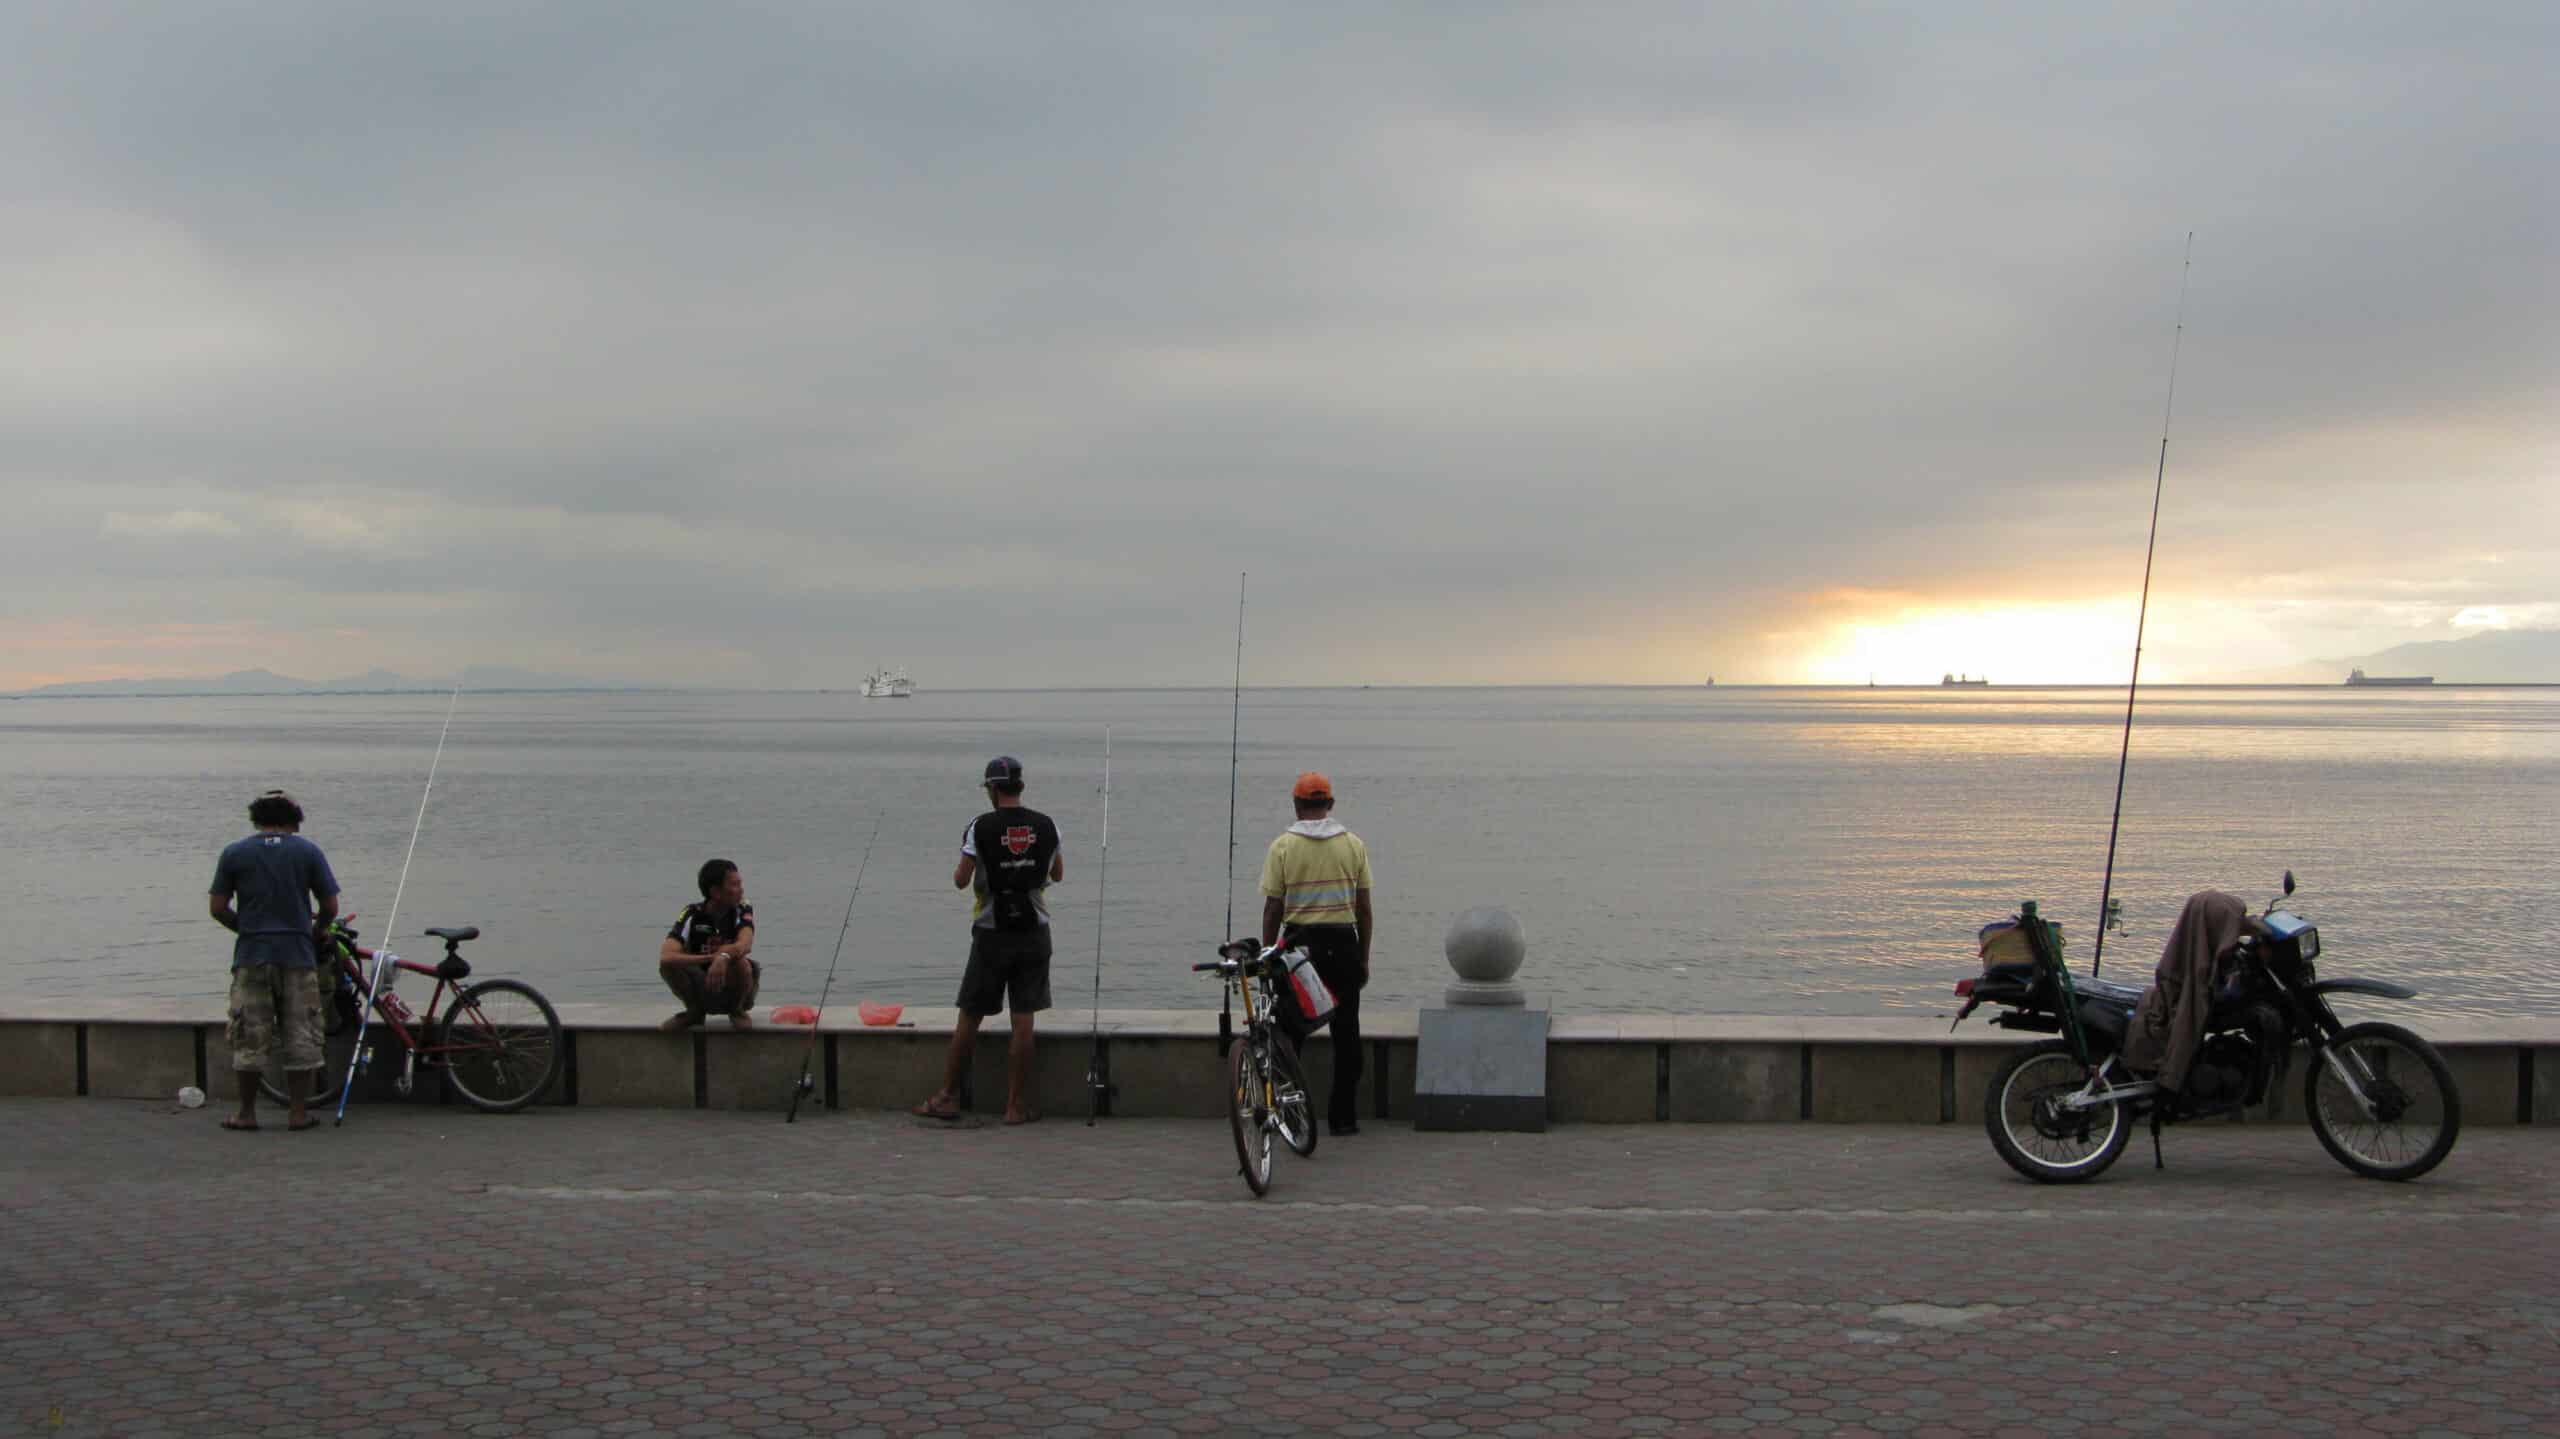 People fishing along the cleaner side of Manila Bay. Photo: Wikimedia Commons.